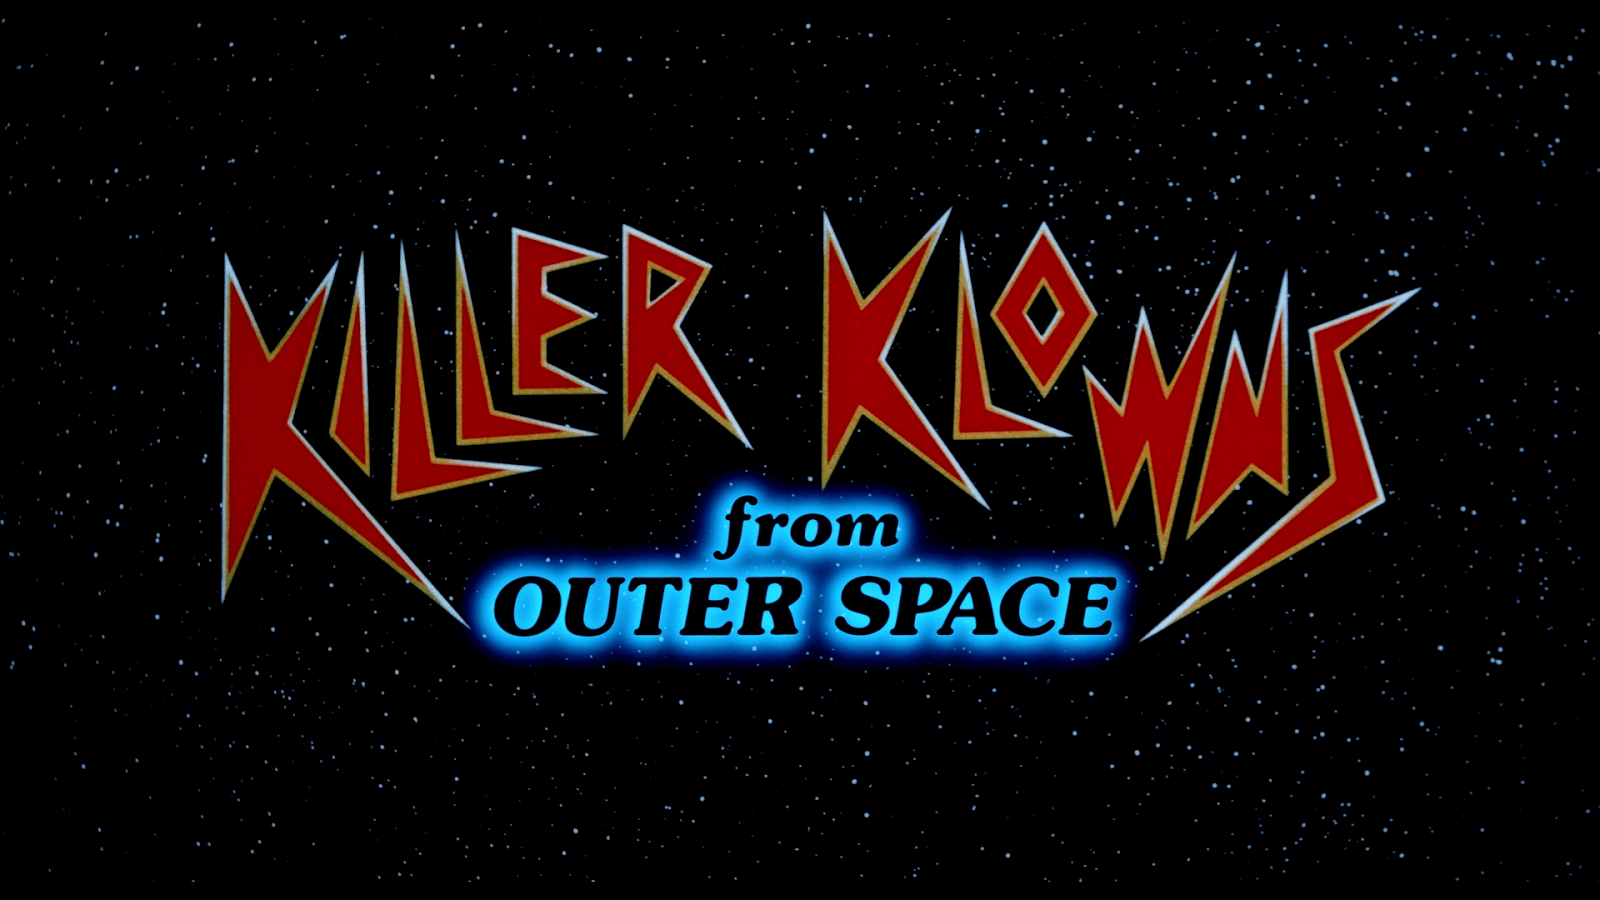 Killer Klowns from Outer Space 1988. Killer Klowns from Outer Space. Клоуны-убийцы из космоса. Killer Klowns from Outer Space poster. Killer from outer space